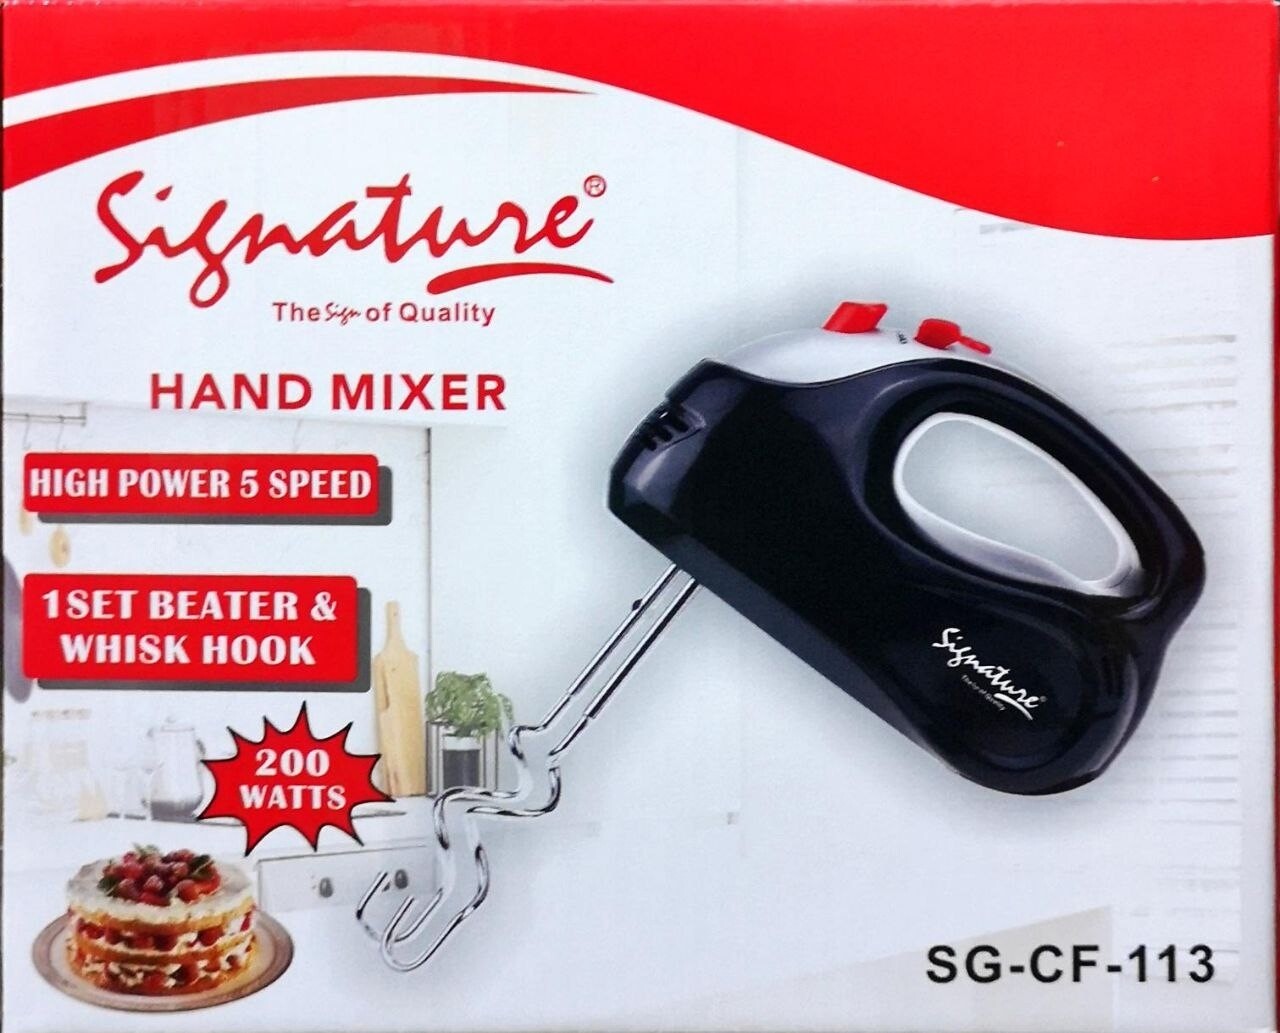 Signature hand mixer for all your cooking tasks: Beating, Mixing, Whisking ,Blending, Mashing with high quality stainless-steel attachments. 2 Detachable Beaters & Whisker / DoughSG-CF-113